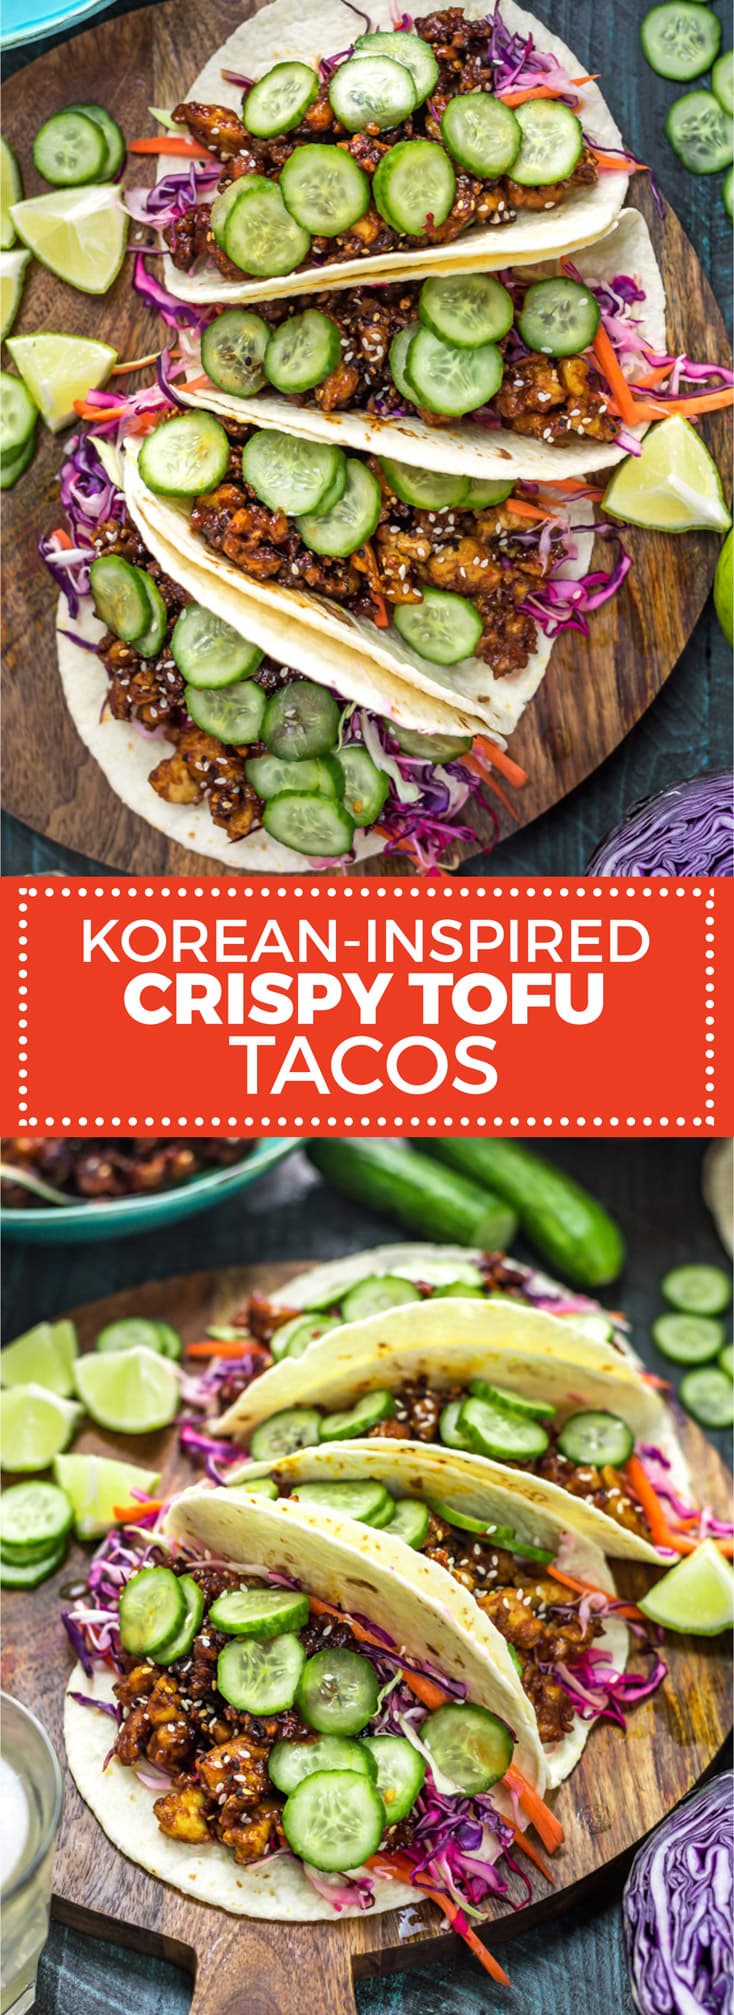 Korean-Inspired Crispy Tofu Tacos. Learn the secret to making the best crispy tofu and serve it in flavor-packed tacos with crunchy slaw and quick pickles.